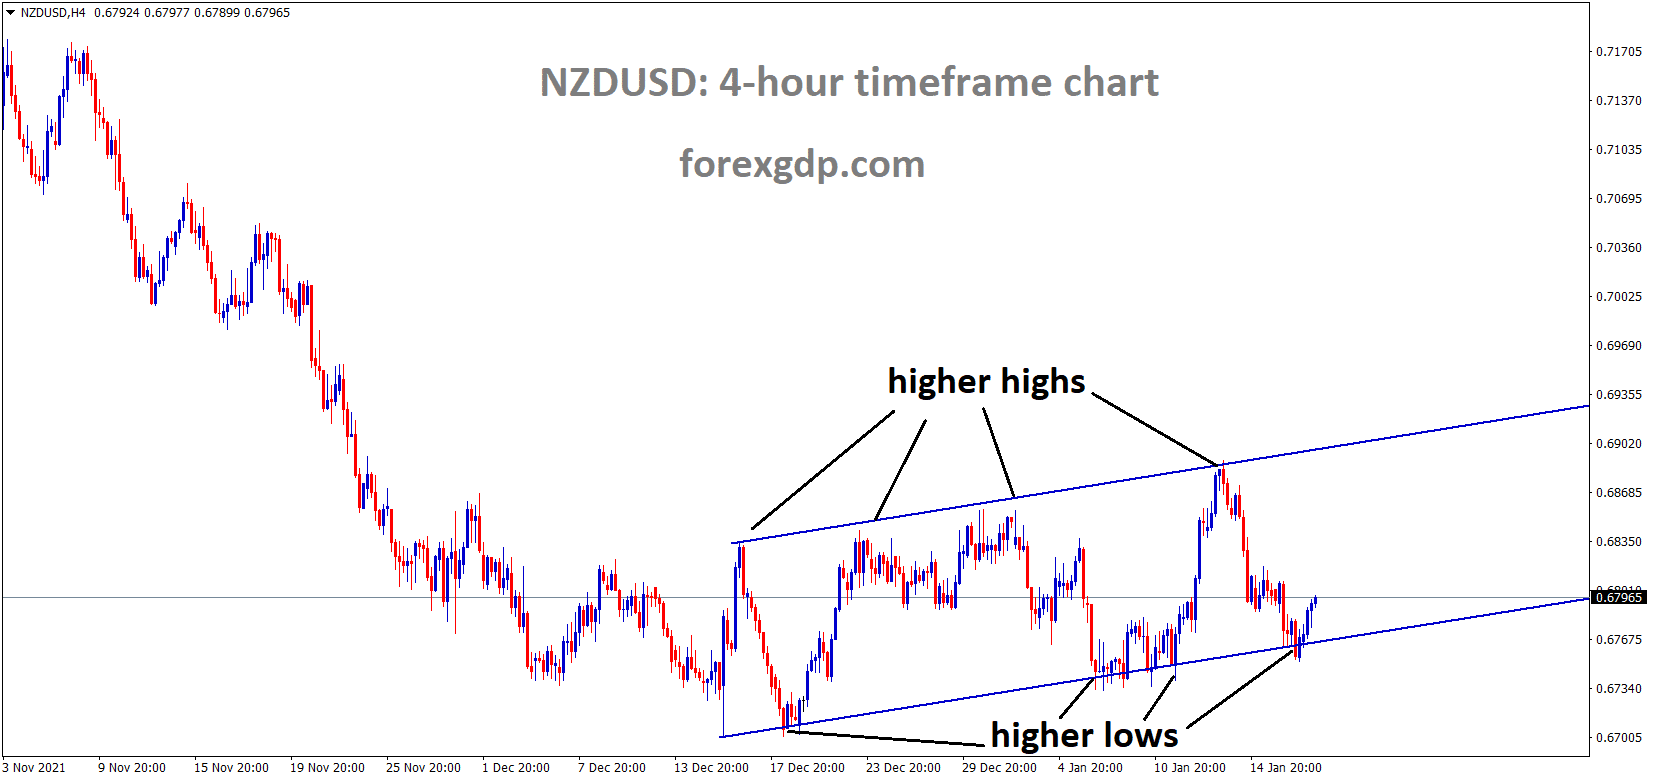 NZDUSD is moving in an Ascending channel and the market has rebounded from the higher low area of the Ascending channel.